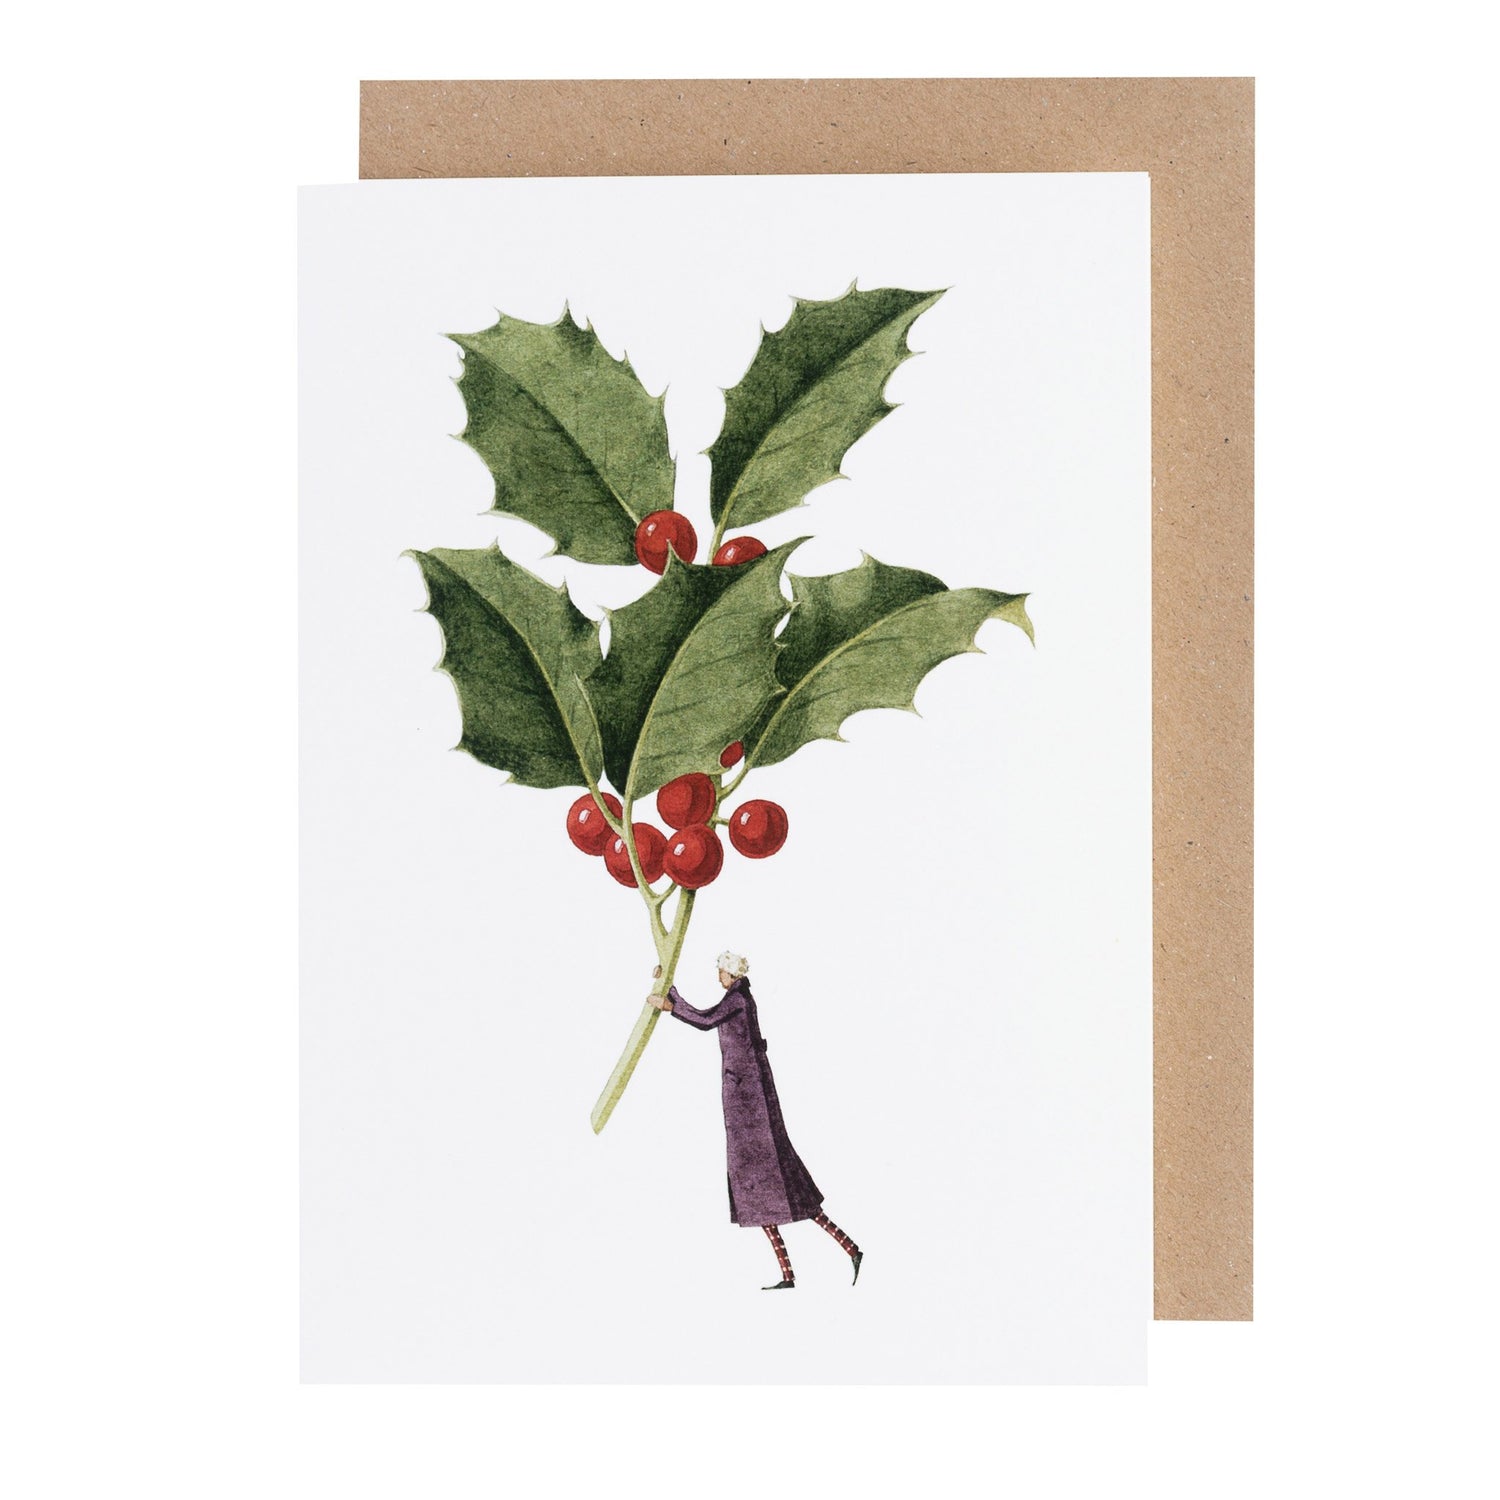 environmentally sustainable paper, compostable packaging, recycled paper, made in england, illustration, holly, christmas